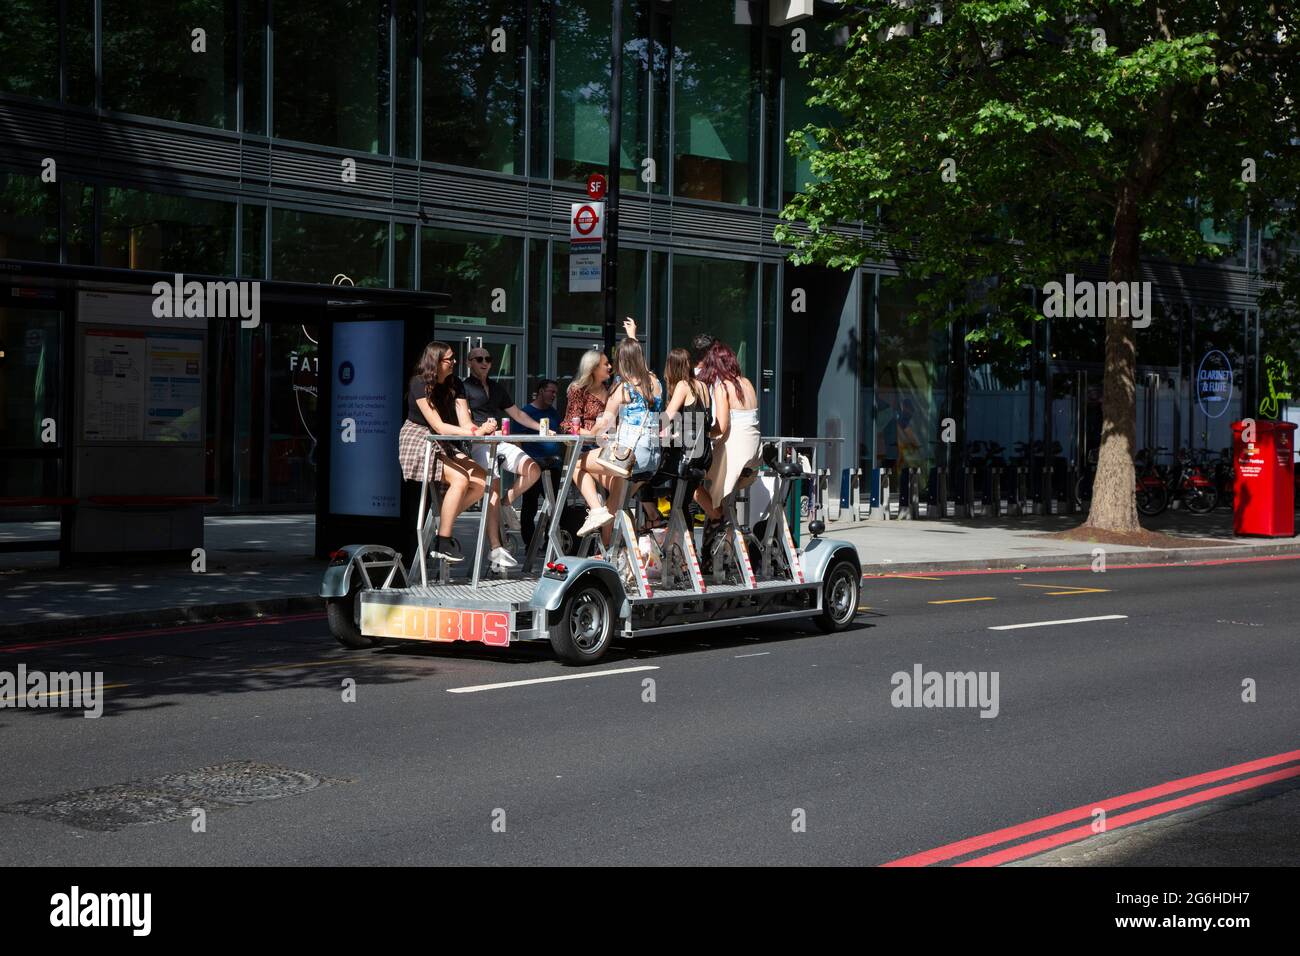 People enjoying the sunshine on a Pedibus, also called a beer bike in Central London. Stock Photo